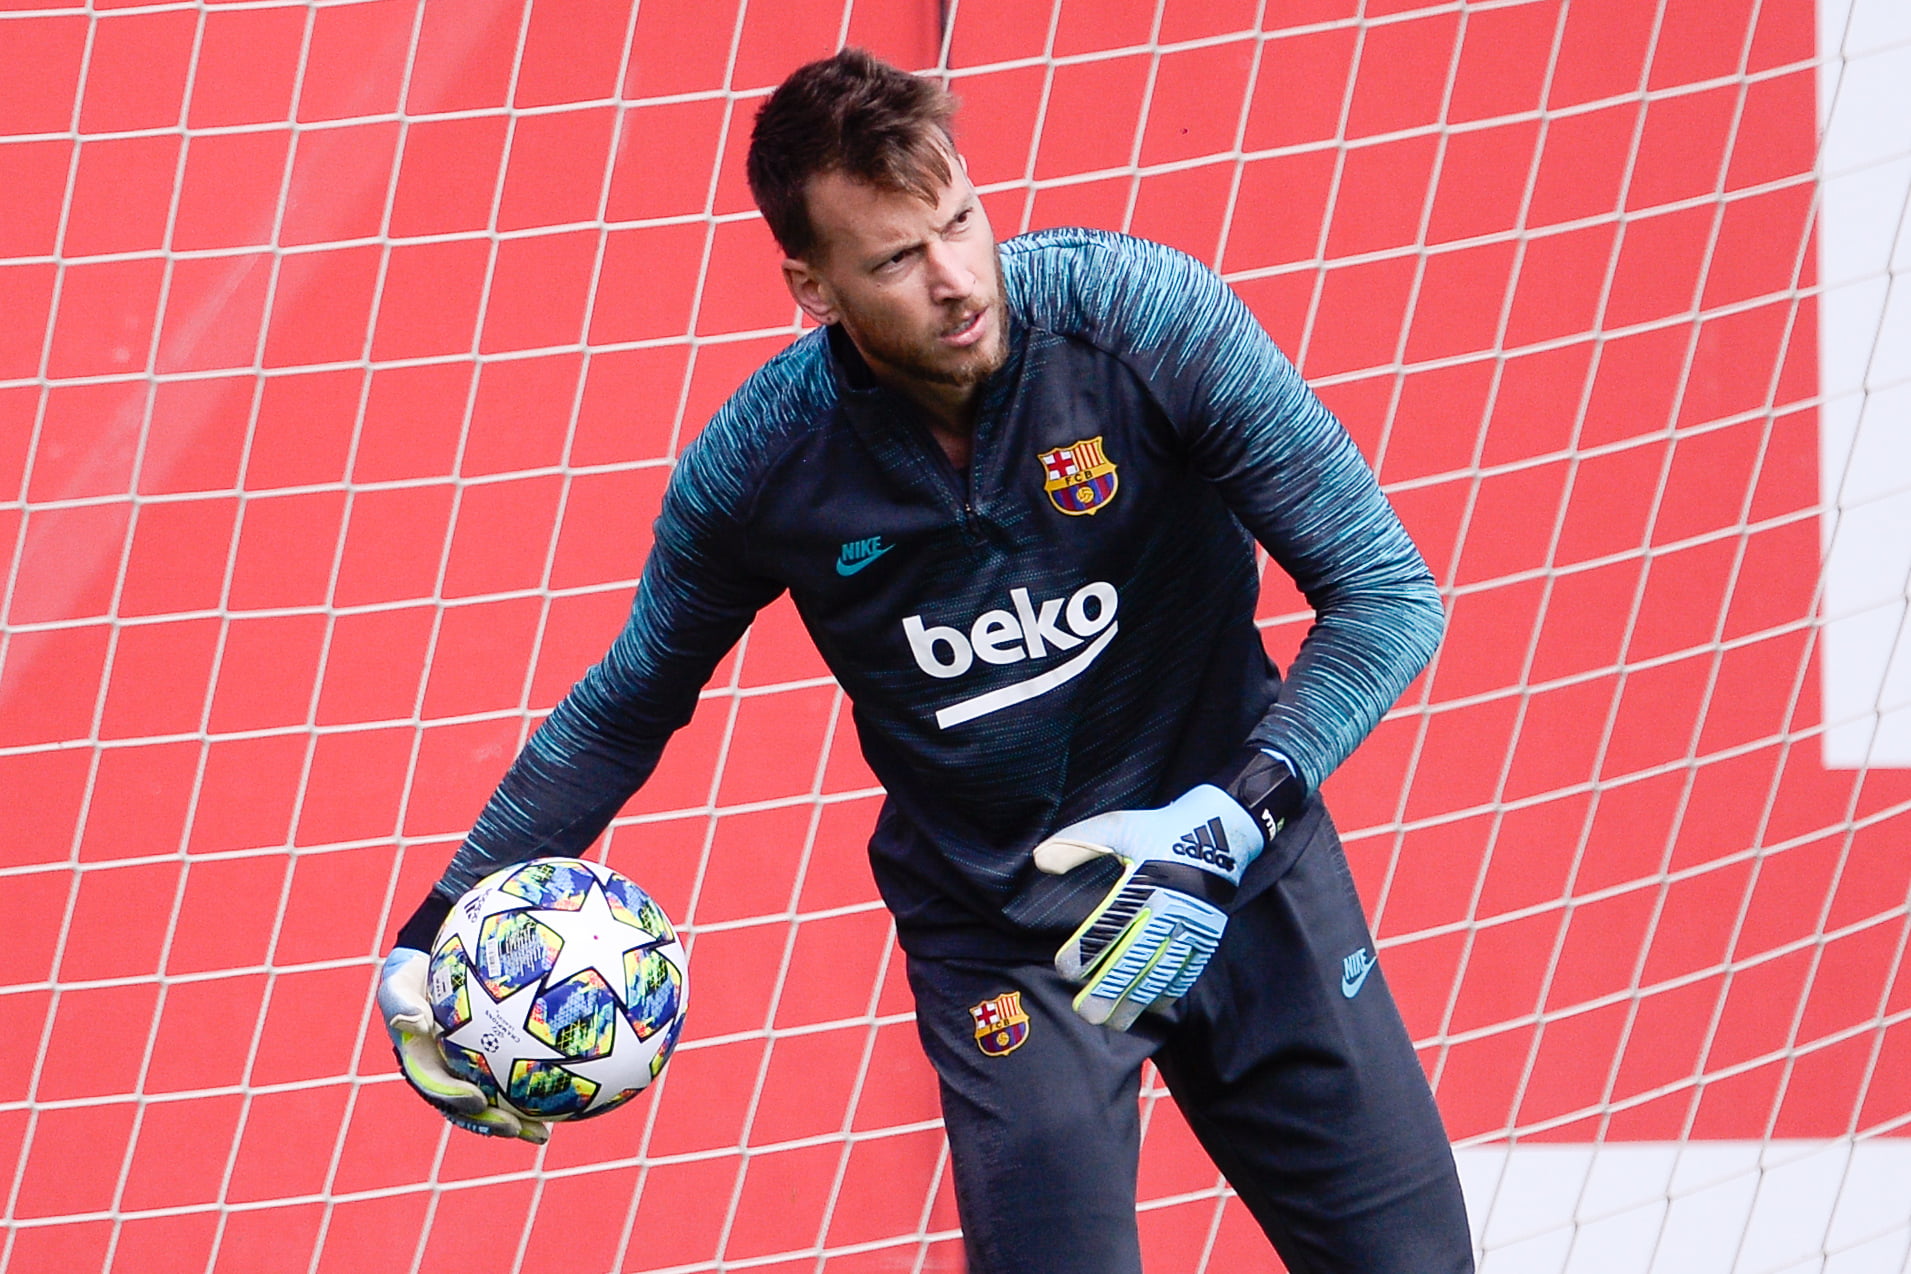 Barcelona set €15m asking price for Neto who is seen in the photo